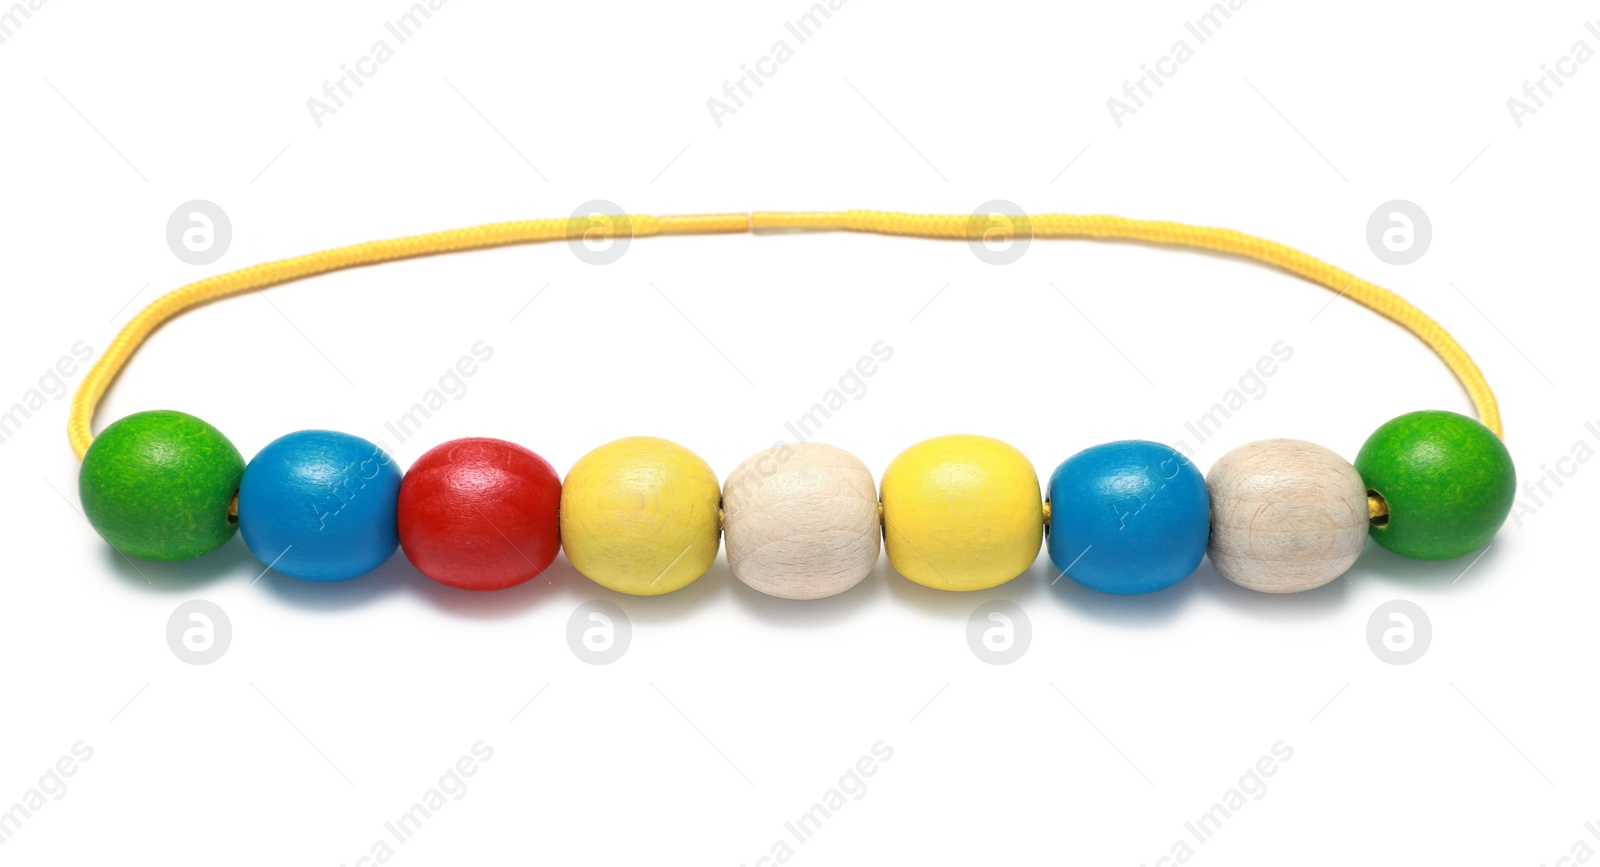 Photo of Wooden pieces and string for threading activity isolated on white. Educational toy for motor skills development